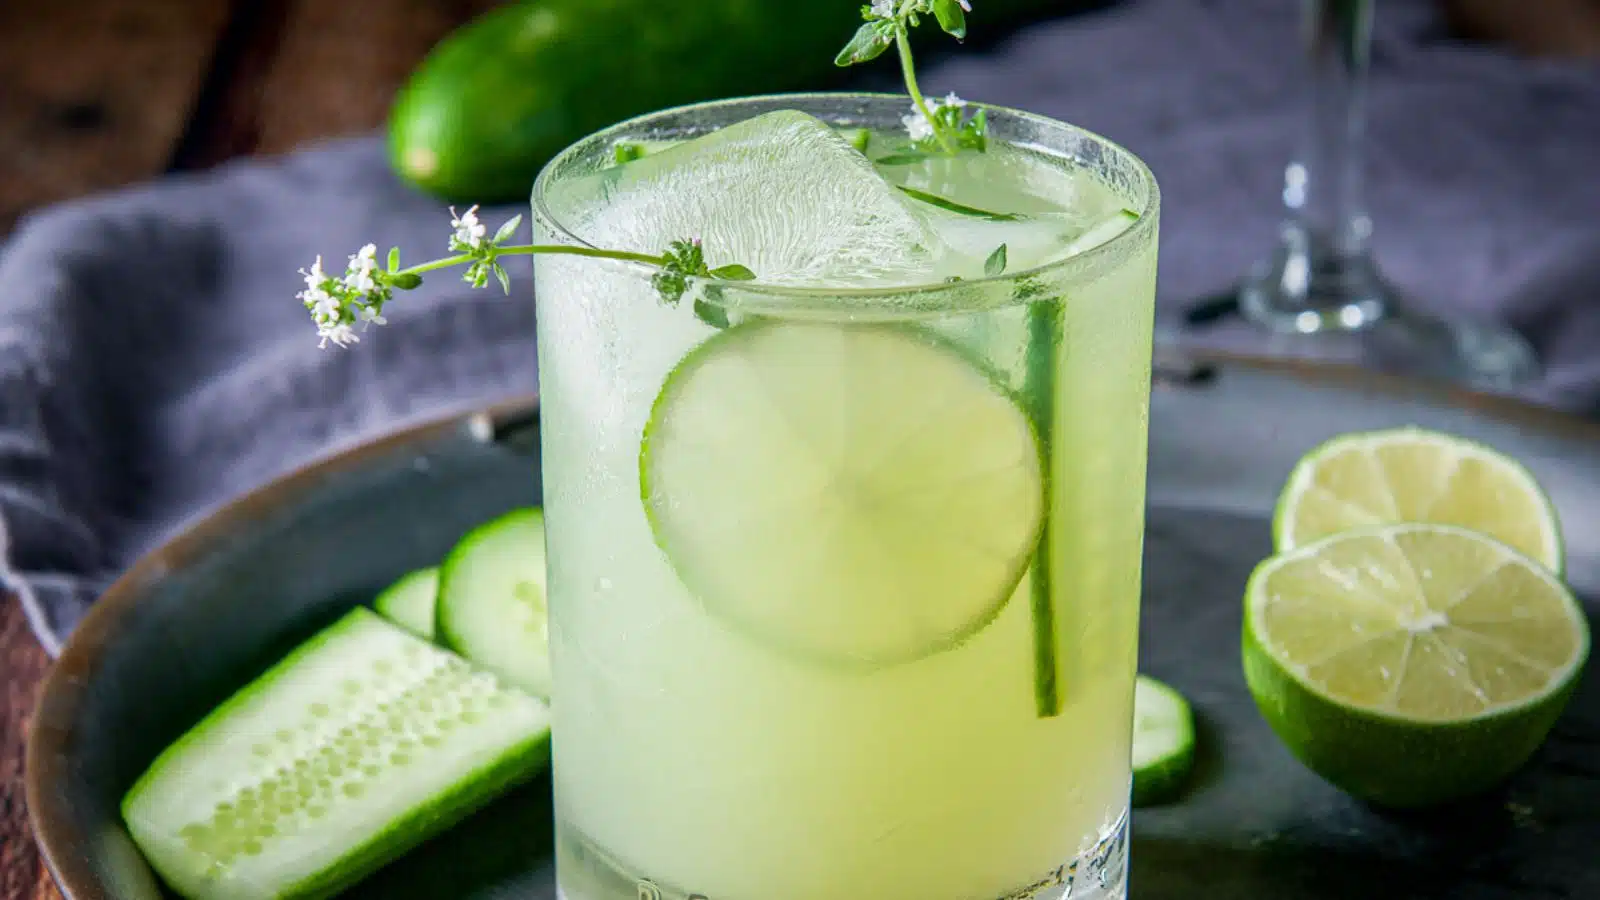 A glass with the margarita in it along with cucumber, an herb and lime wheels